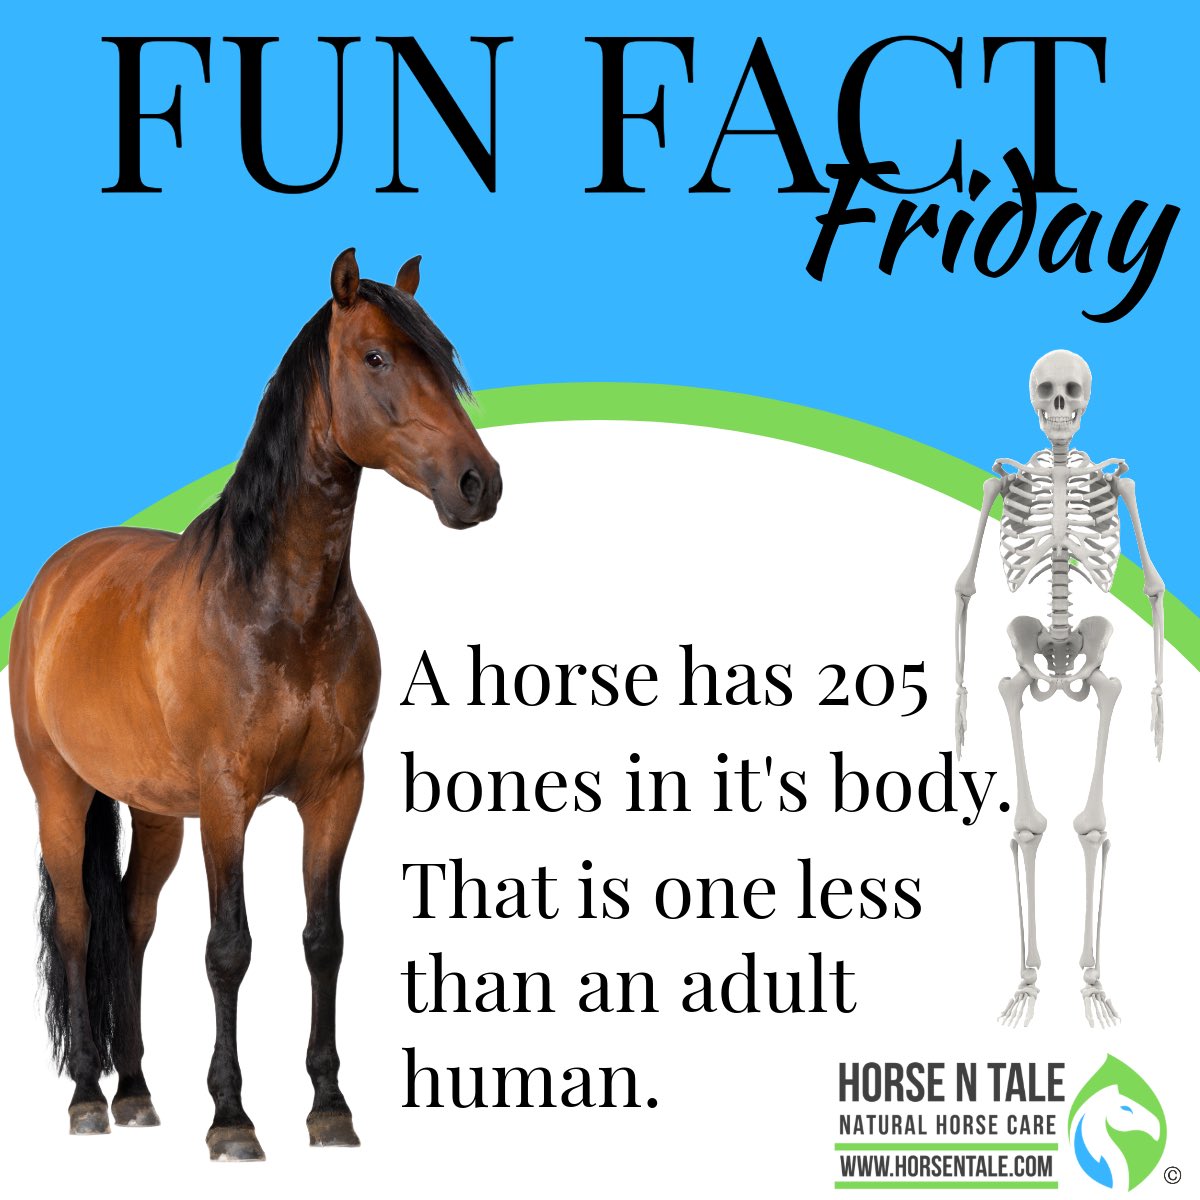 Fascinating Fun Fact Friday ! 

#horsentale #topicalequineproducts #naturalhorsecare #equine #horse #naturalingredients 
#teamhnt #teamhorsentale 
#horseshow #horses
#horselover #horseriding
#horseracing 
#friday #funfactfriday #fridays #fridayfeeling #funfriday